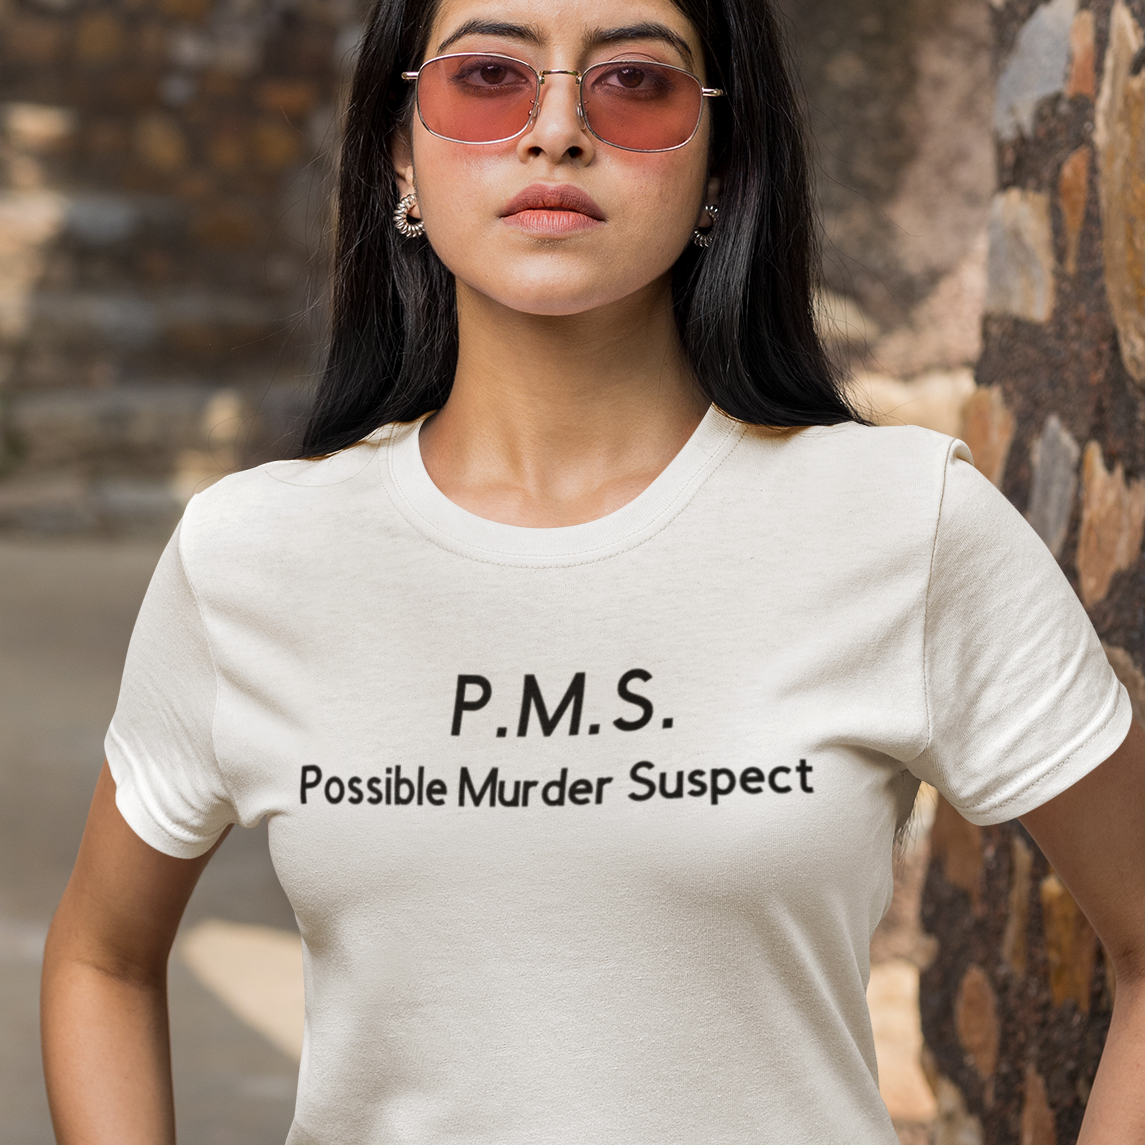 pms-possible-murder-suspect-t-shirt-mockup-featuring-a-serious-woman-with-sunglasses-with-her-hands-in-her-pockets